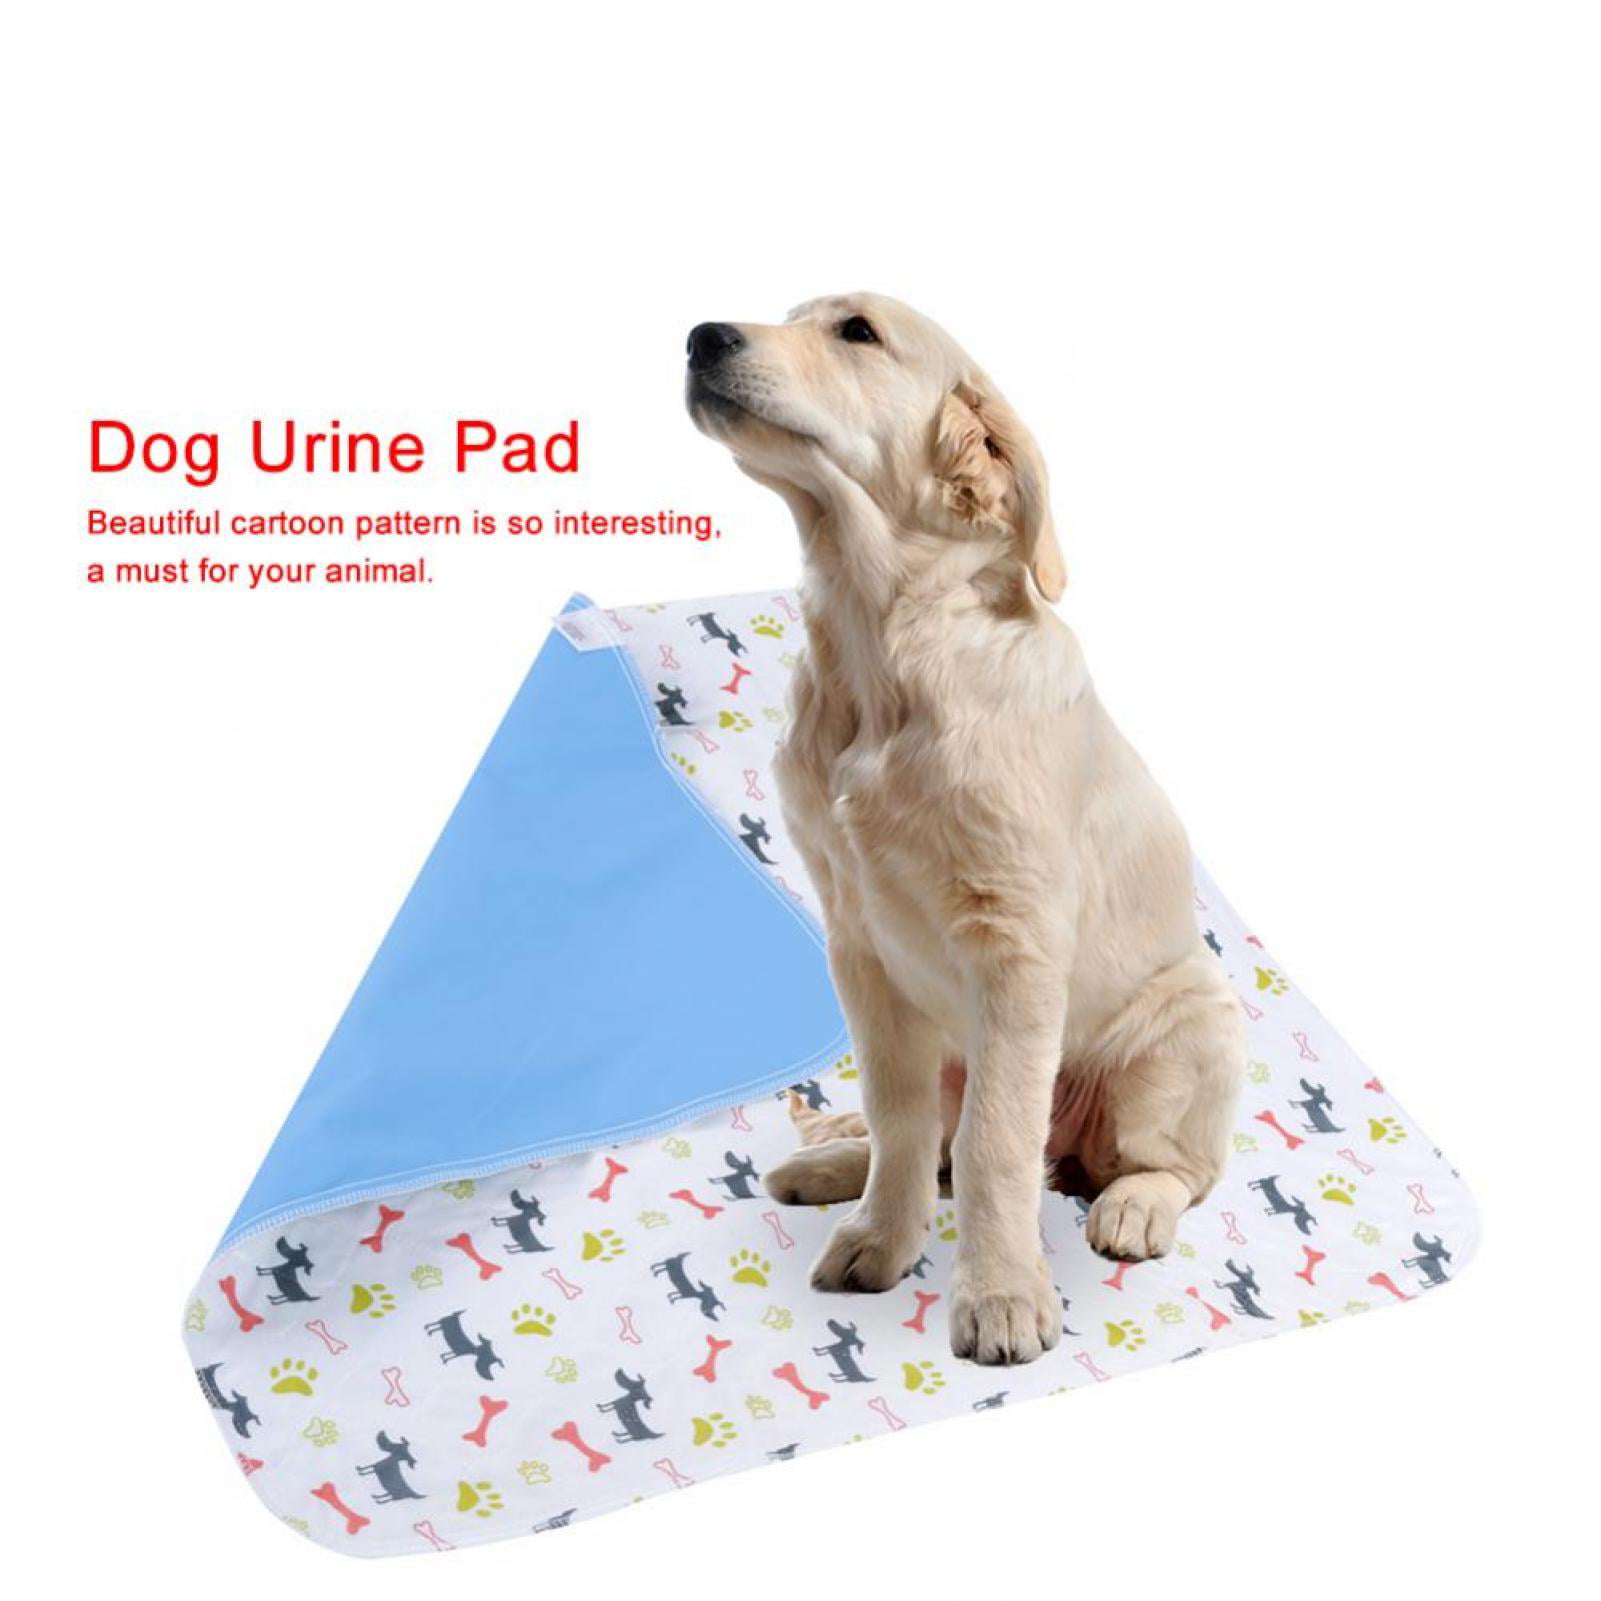 Large Waterproof Reusable Pee Pads/Quilted Washable Large Dog/Puppy Training Travel Pee Pads Careoutfit 100% Cotton Top 36 x 52 